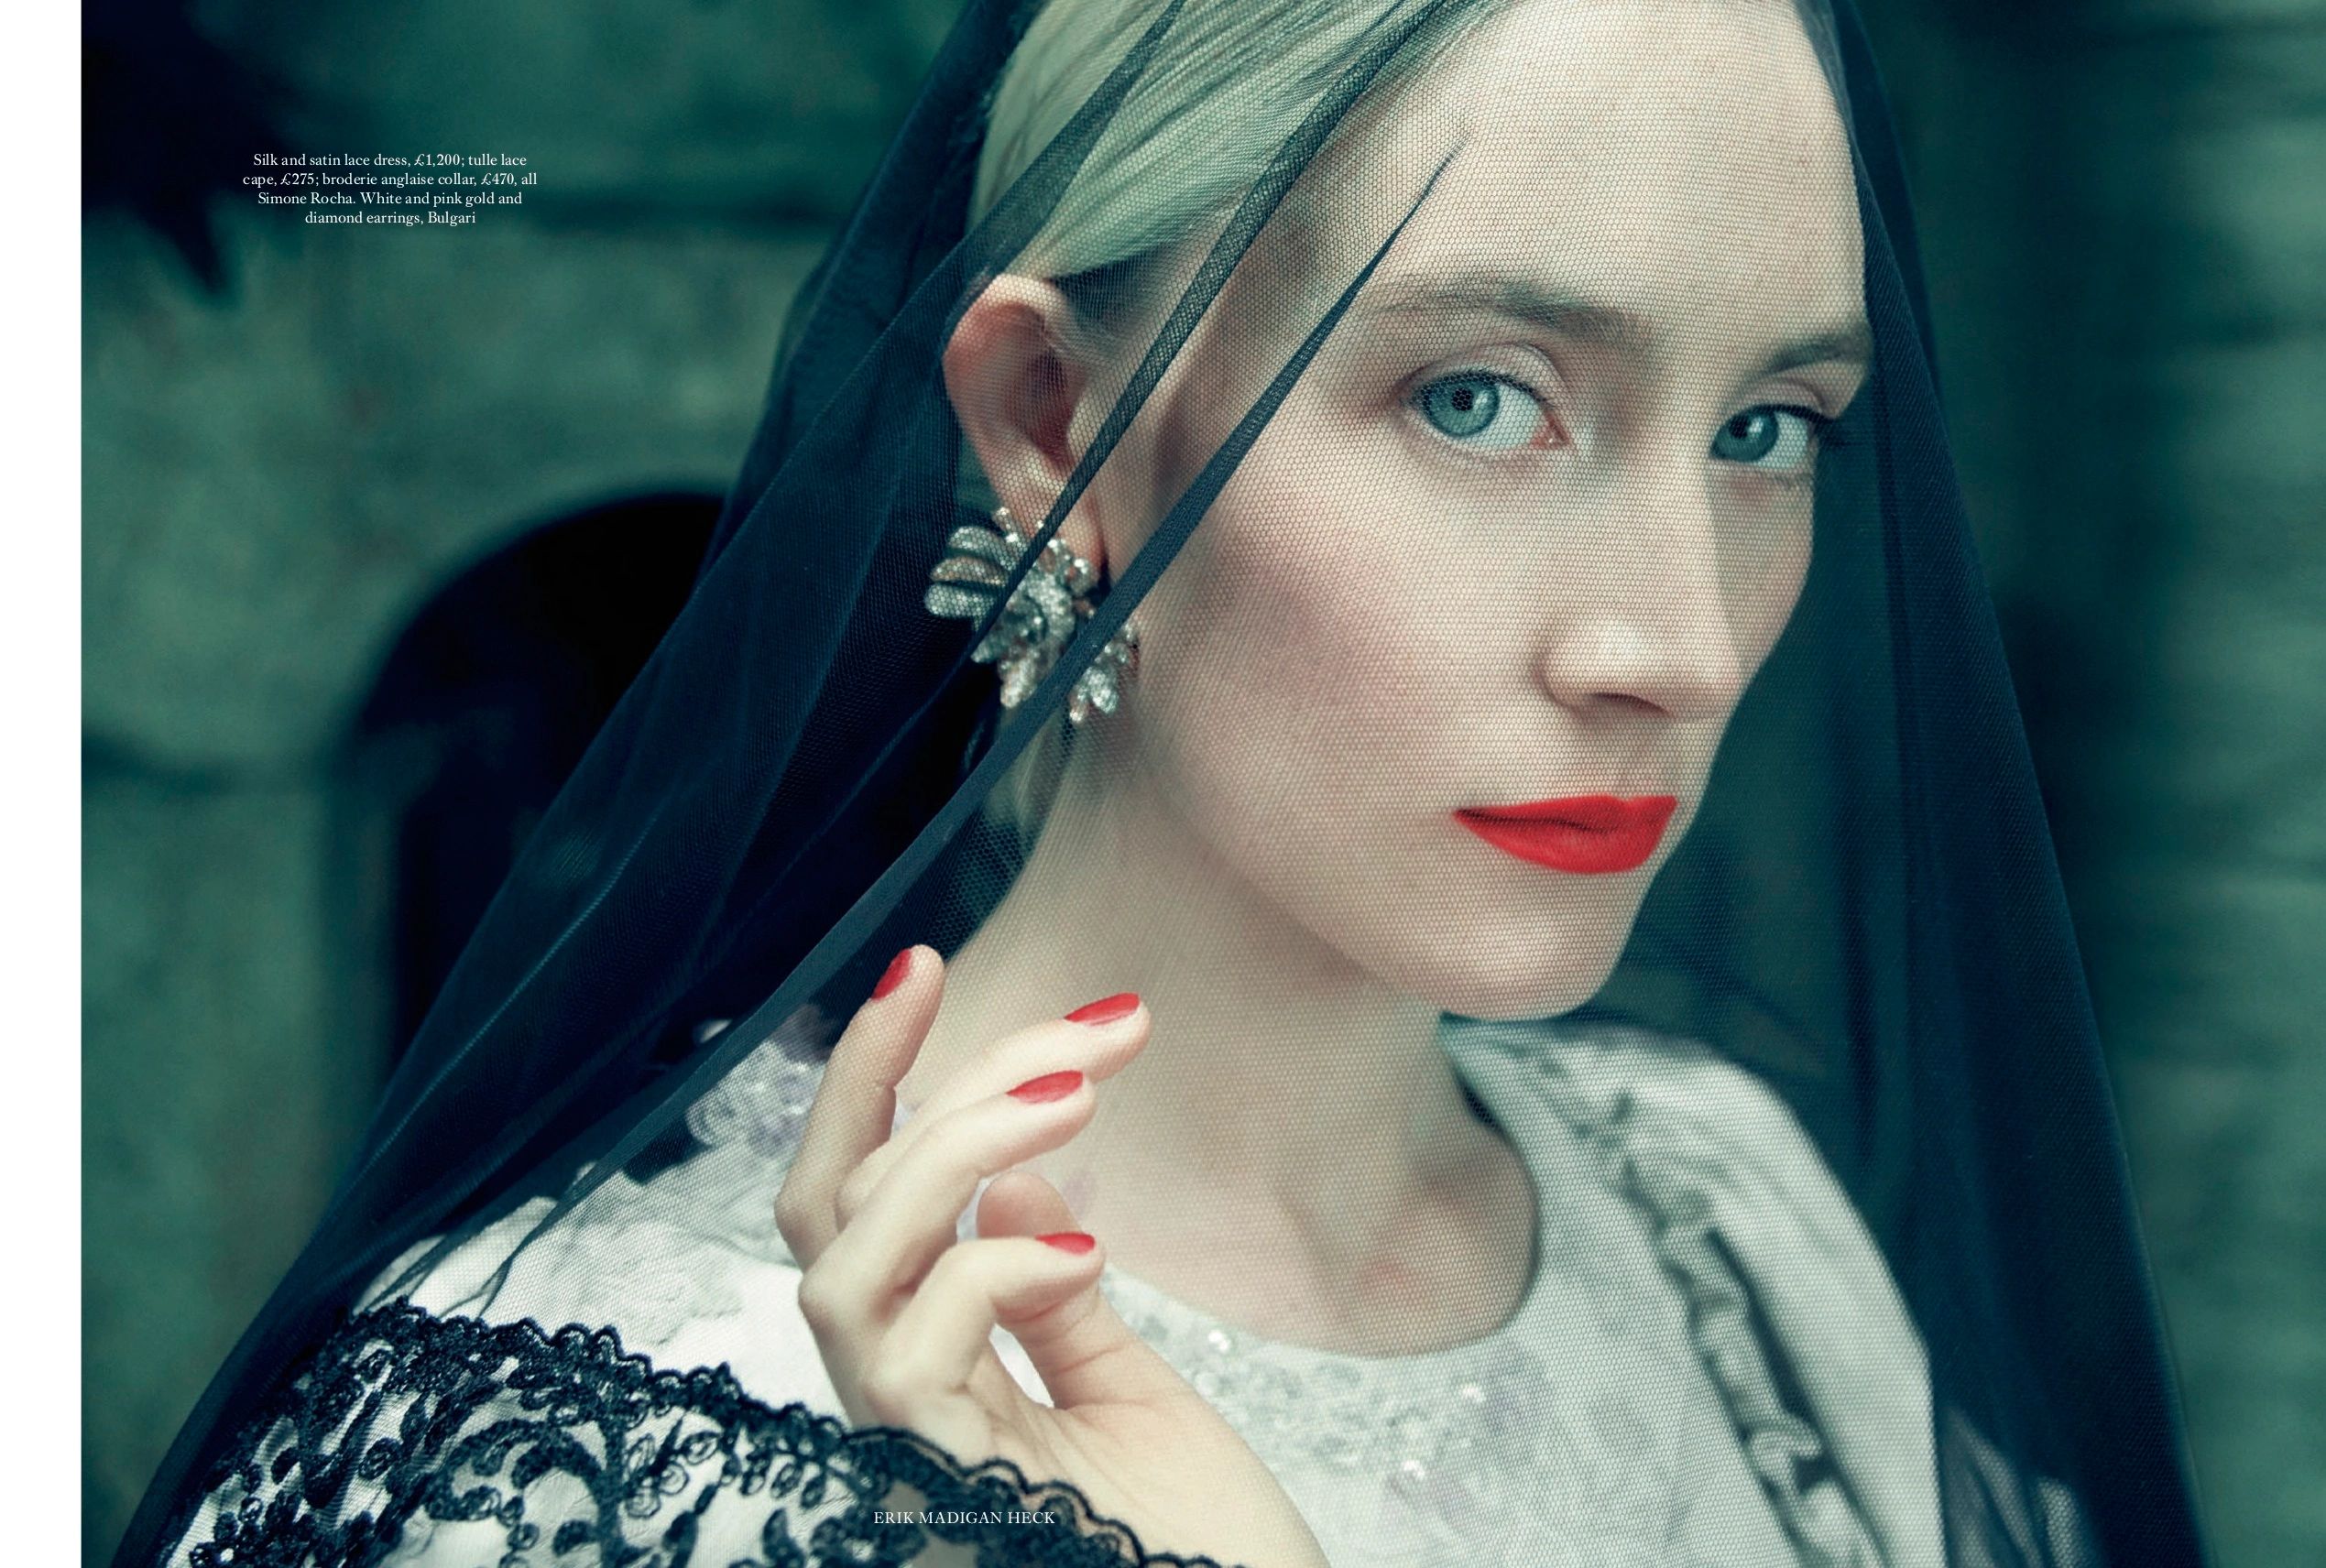 Nails for Harper's Bazaar UK, Saoirse Ronan, as Mary Queen of Scots. Matte red nails Zoya polish